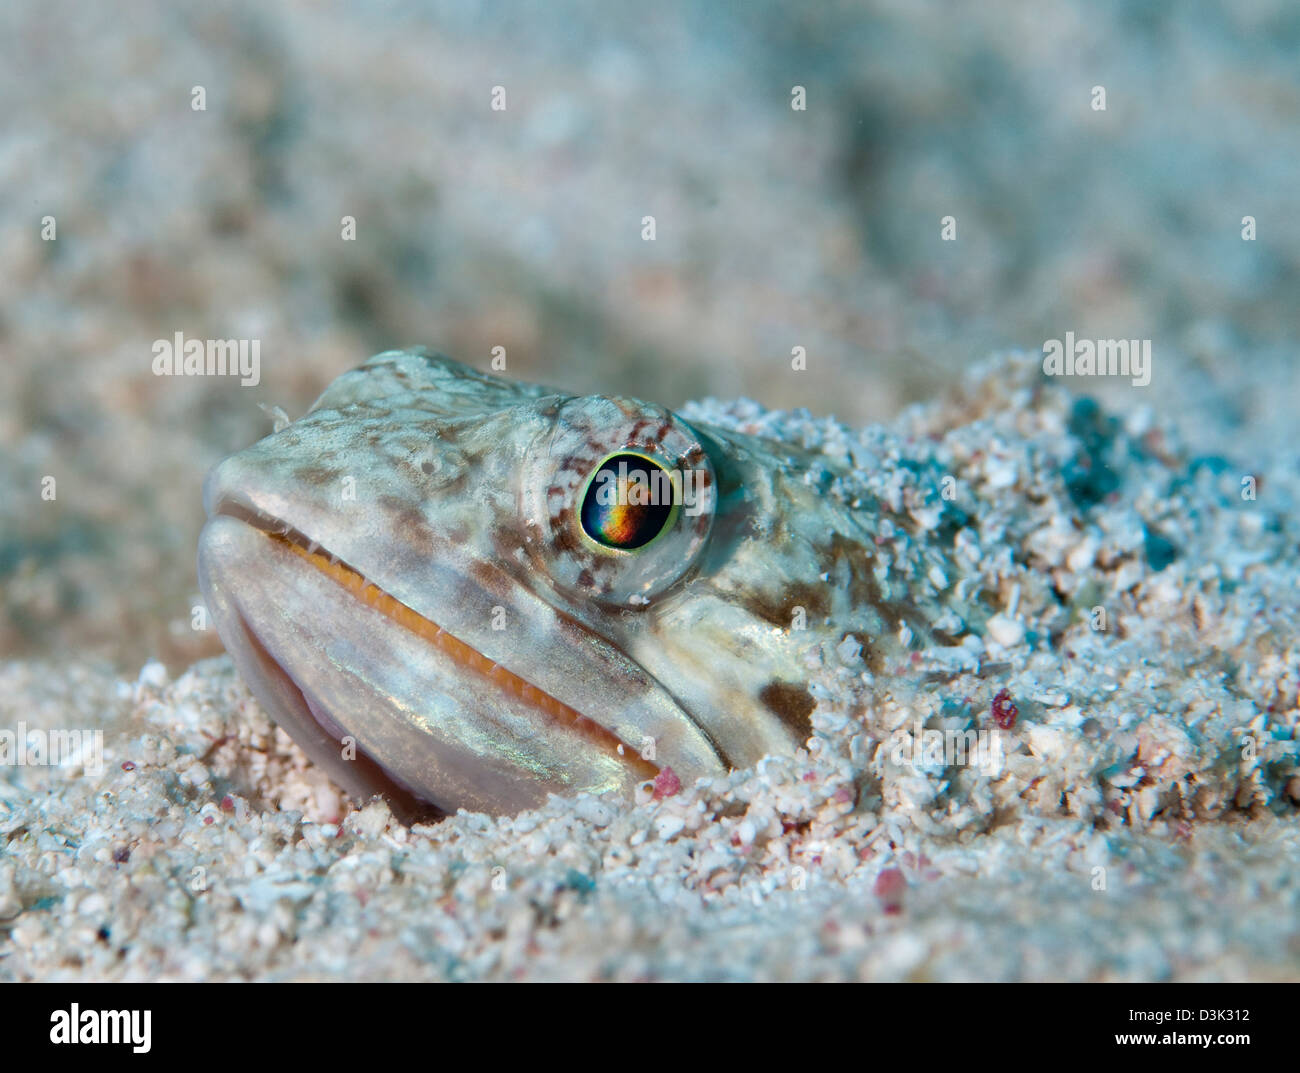 Sand Diver hiding below sand on caribbean reef. Stock Photo